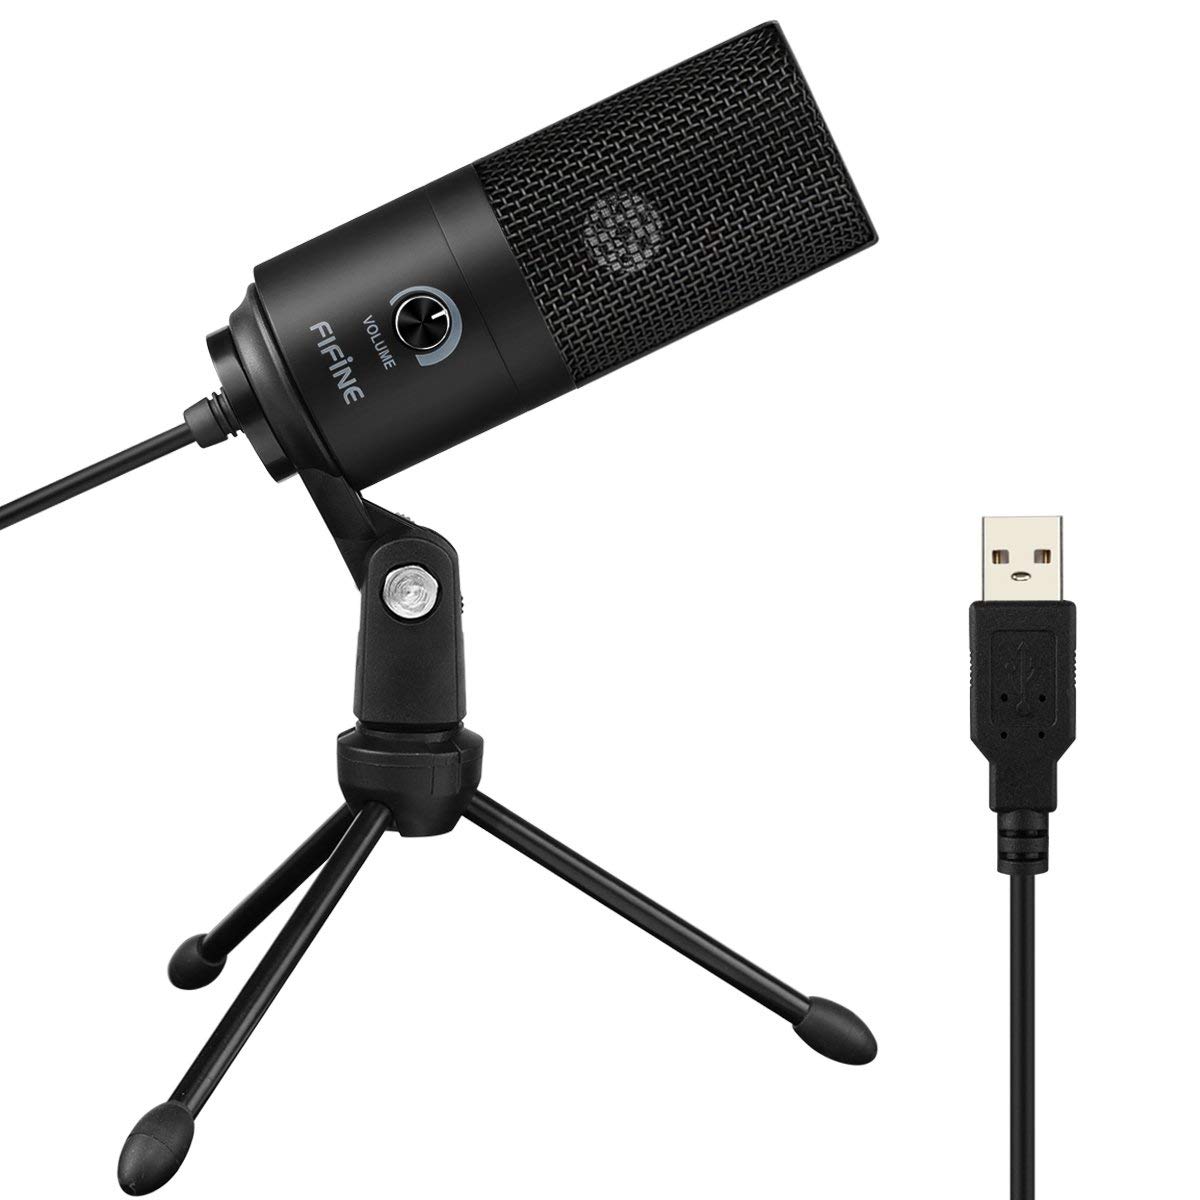 USB Microphone,Fifine Metal Condenser Recording Microphone For Laptop MAC Or Windows Cardioid Studio Recording Vocals, Voice Overs,Streaming Broadcast And YouTube Videos.(669B)